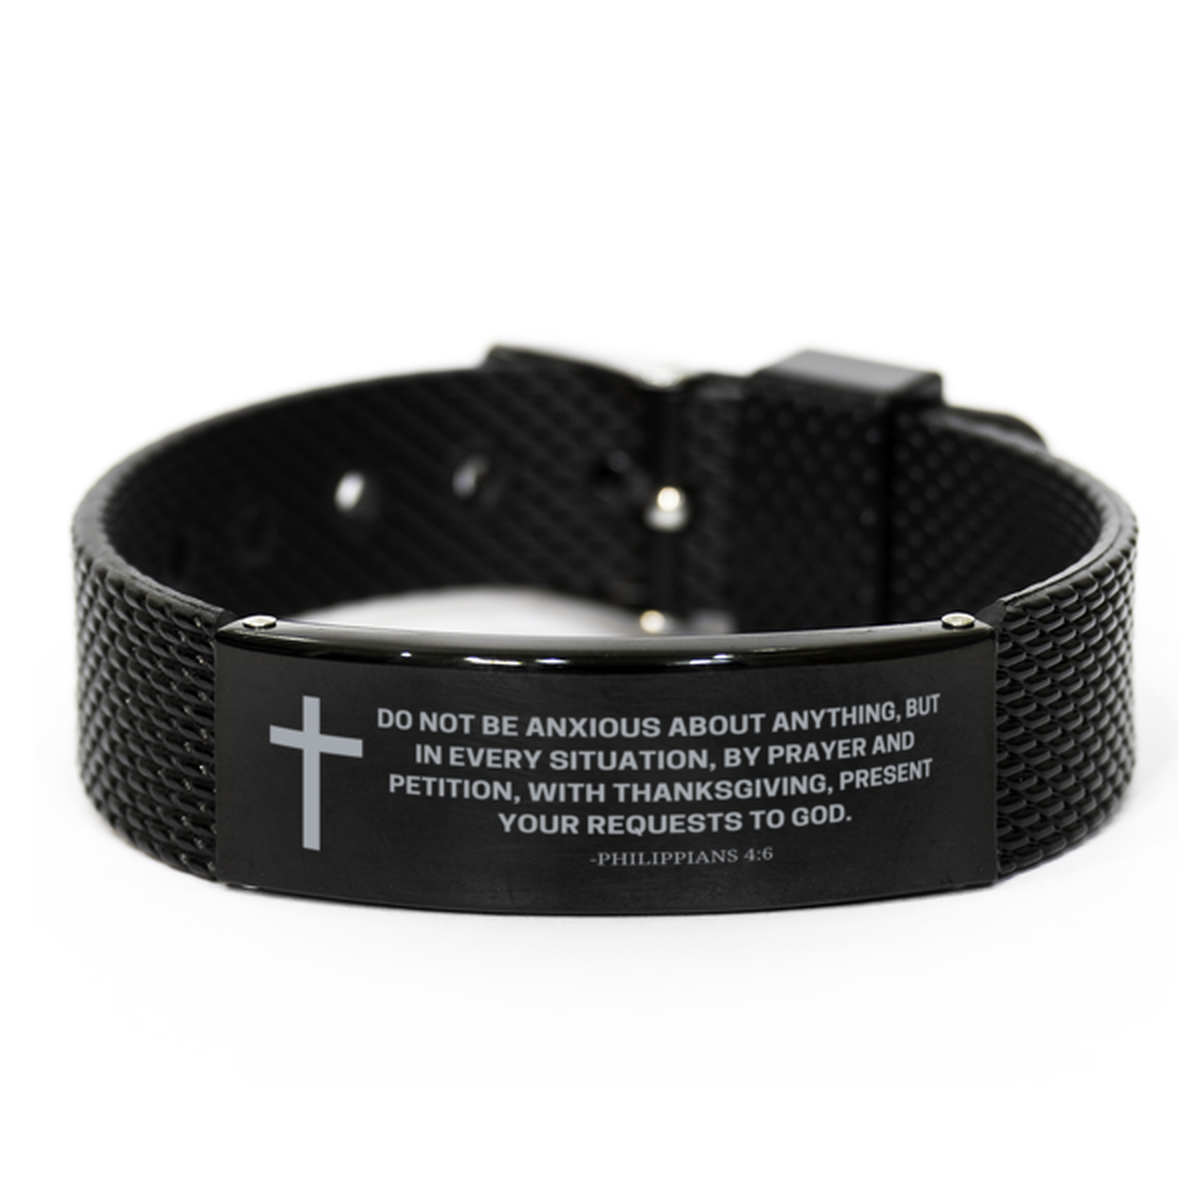 Baptism Gifts For Teenage Boys Girls, Christian Bible Verse Black Shark Mesh Bracelet, Do not be anxious about anything, Catholic Confirmation Gifts for Son, Godson, Grandson, Nephew